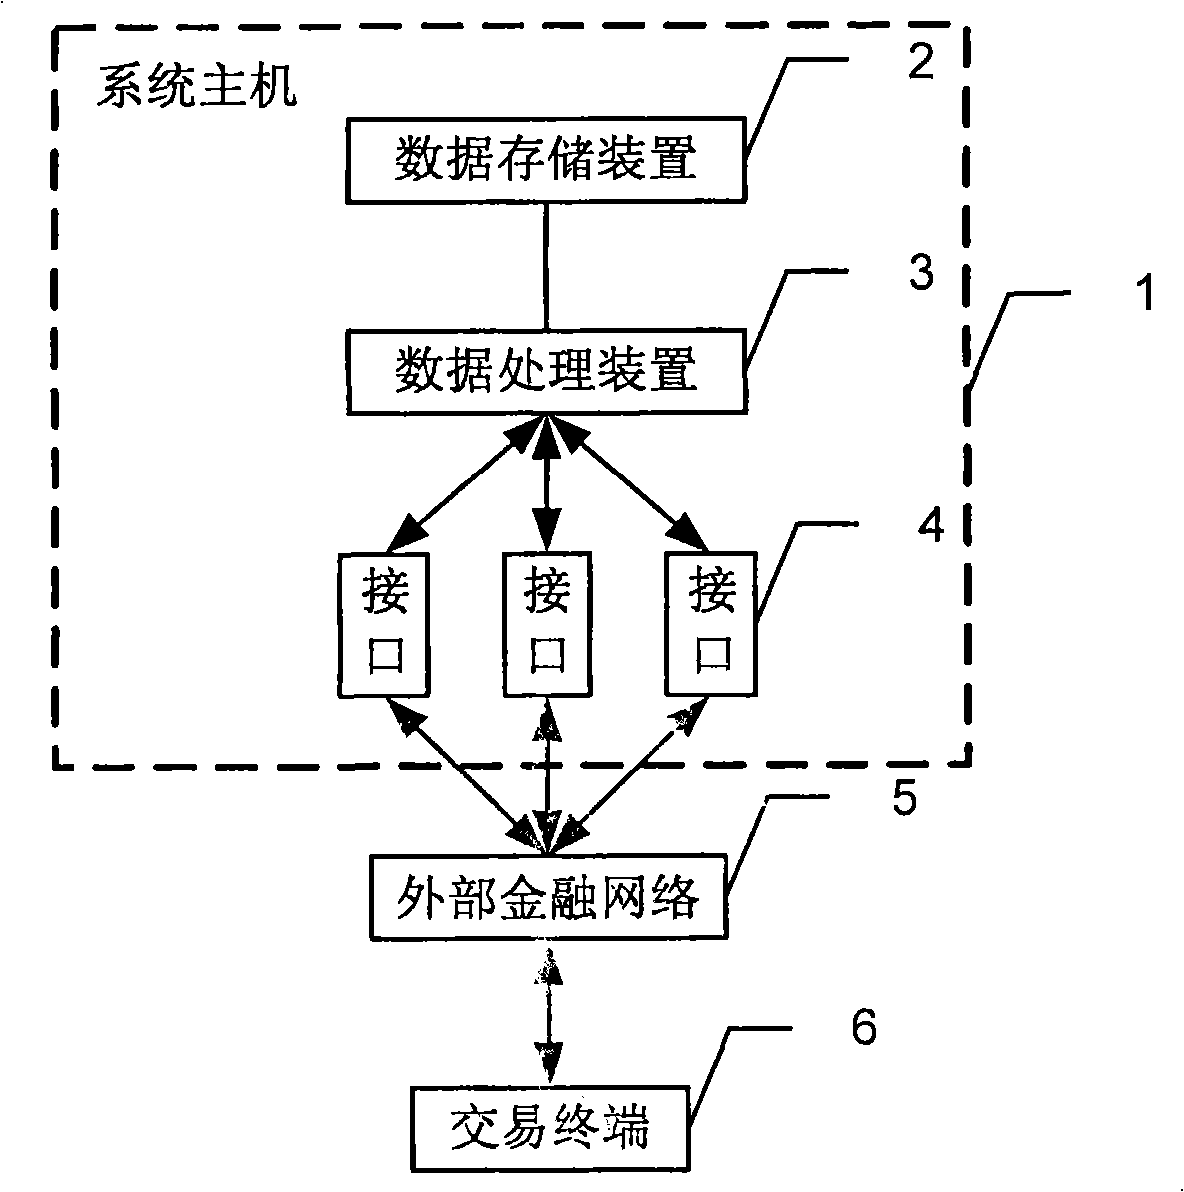 System and method for processing client protocol capital pool data based on network